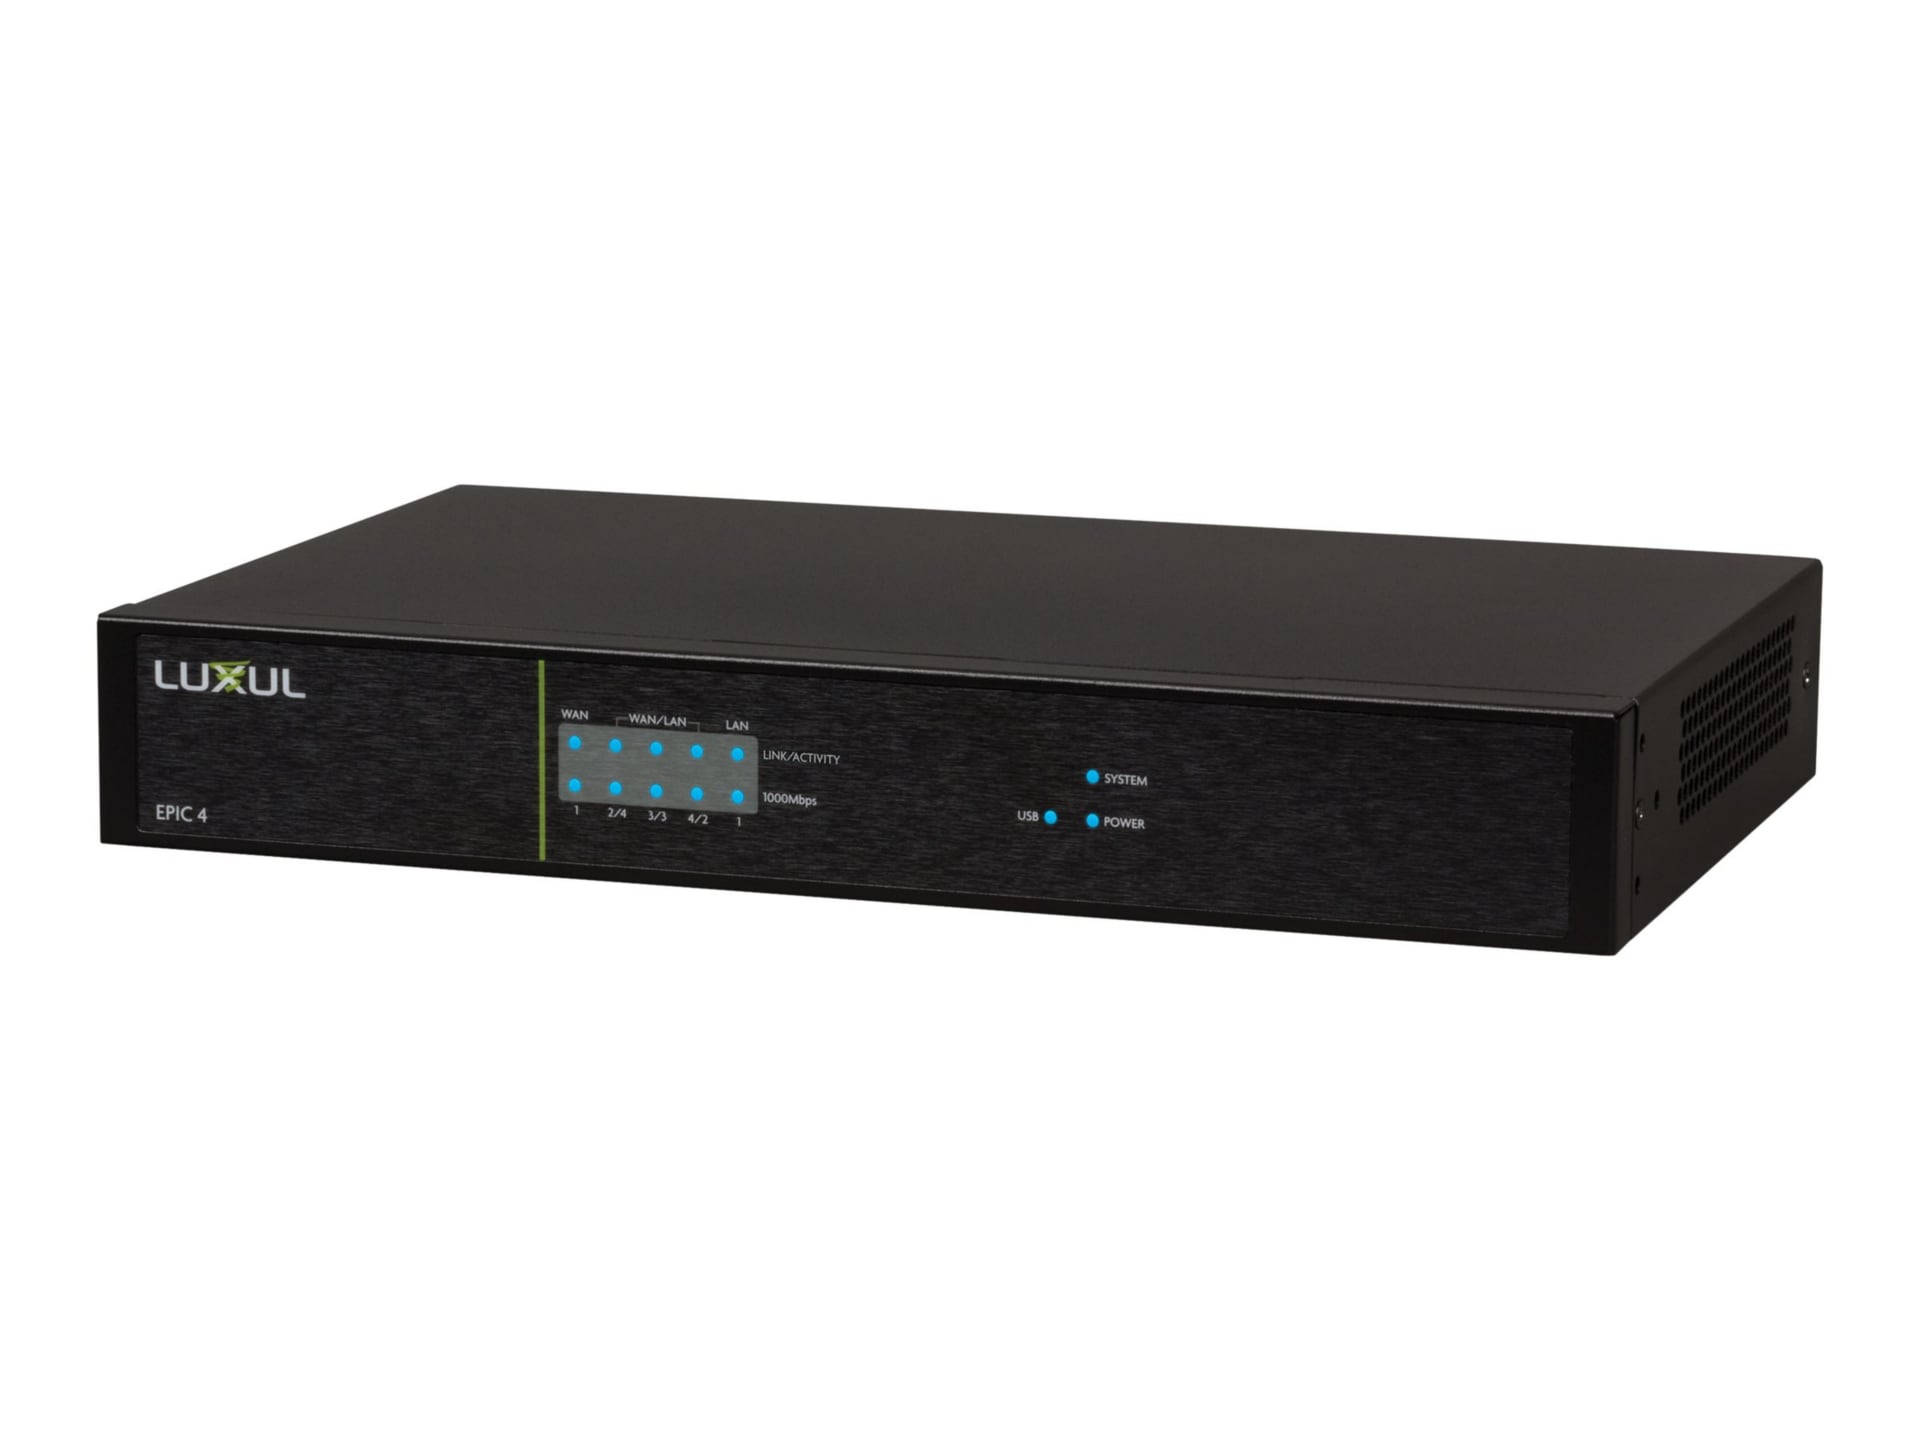 Luxul Epic 4 Multi-Wan Gigabit High-Speed Networking Router